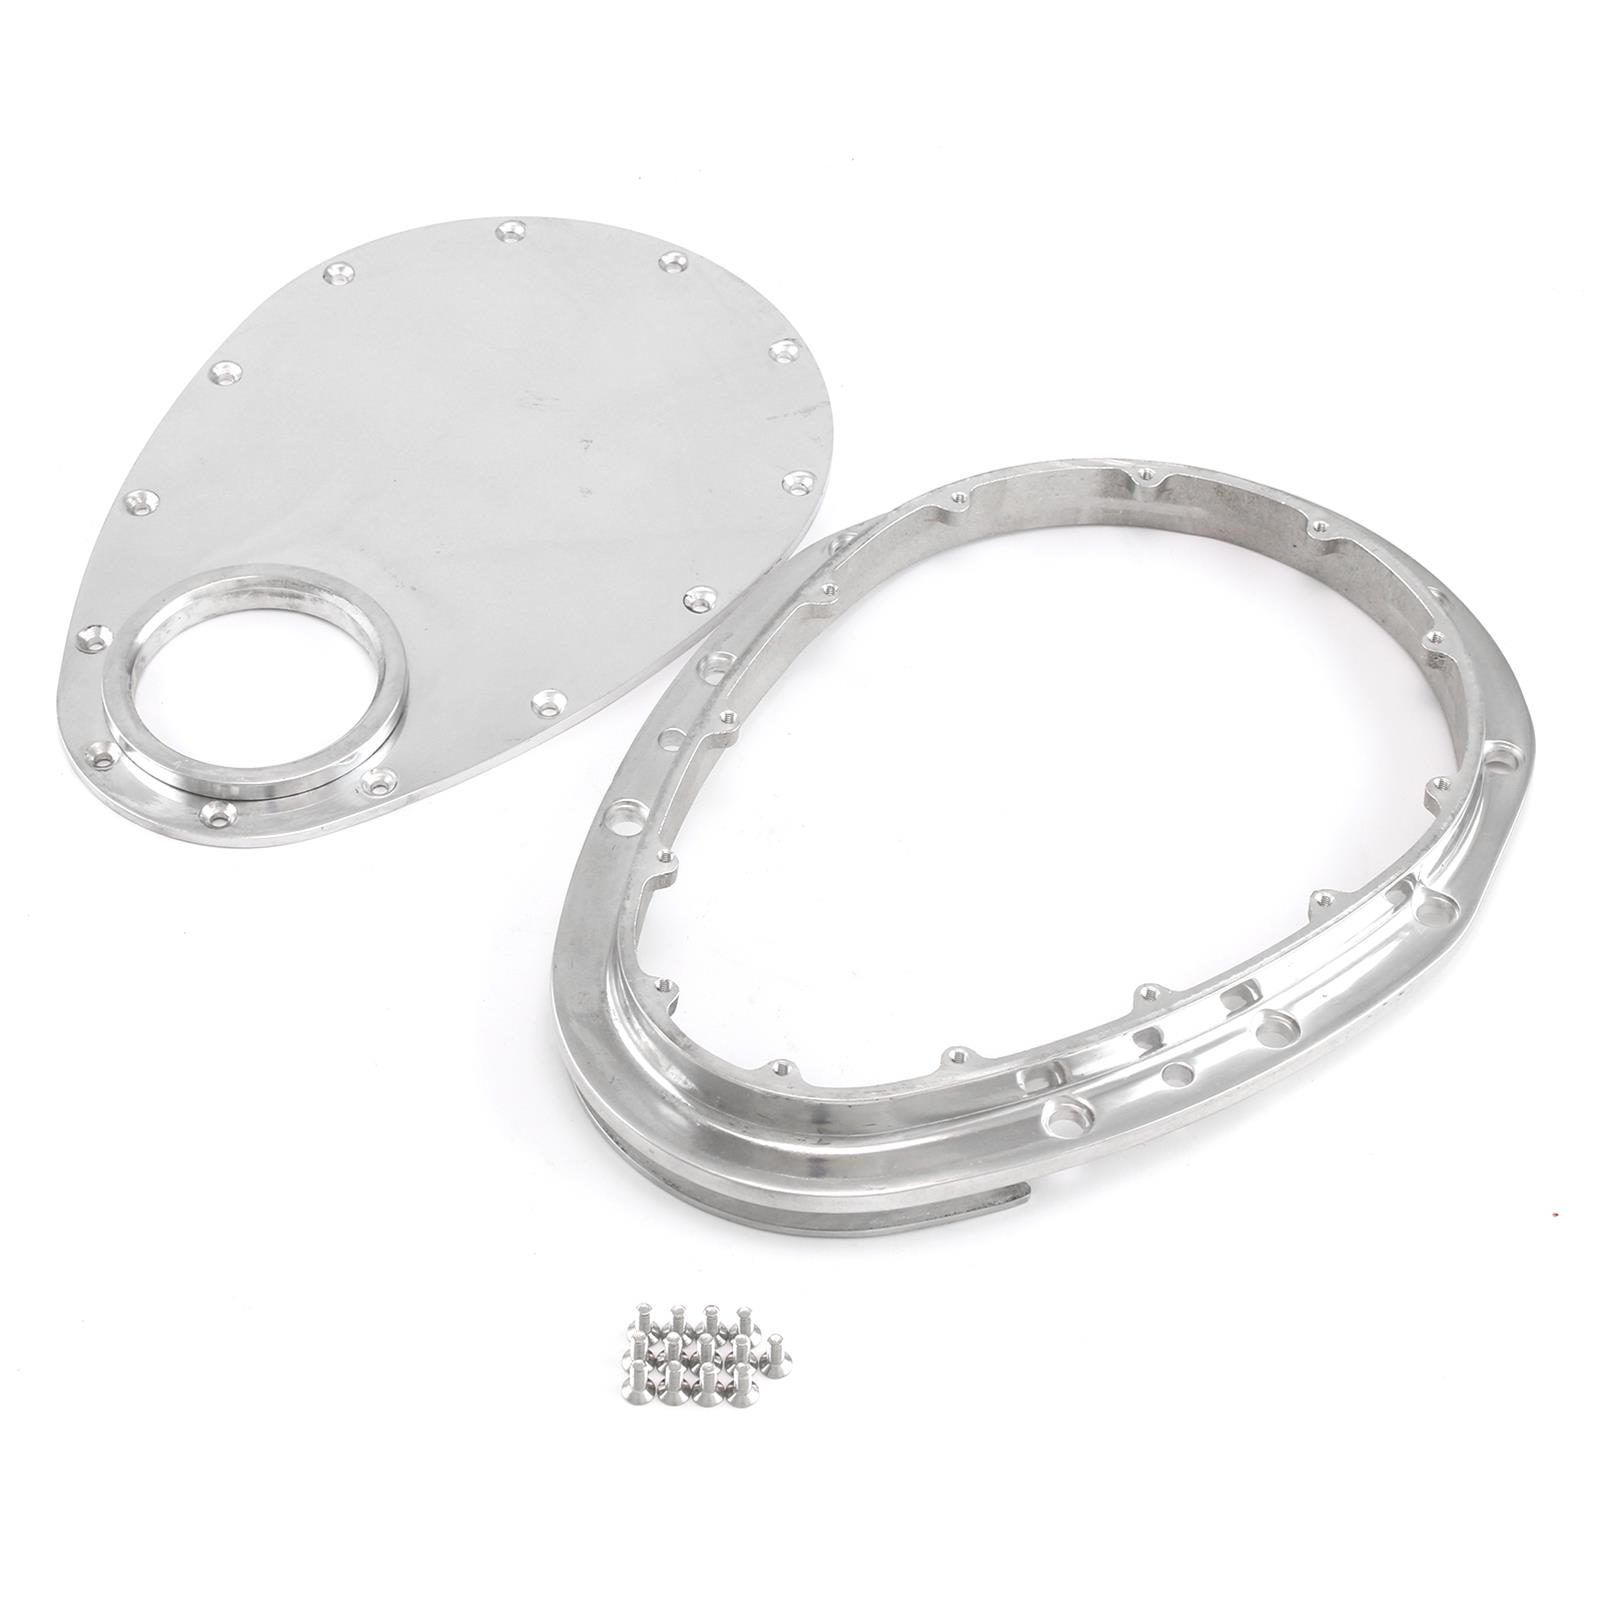 Speedmaster PCE265.1039 2-Piece Timing Covers